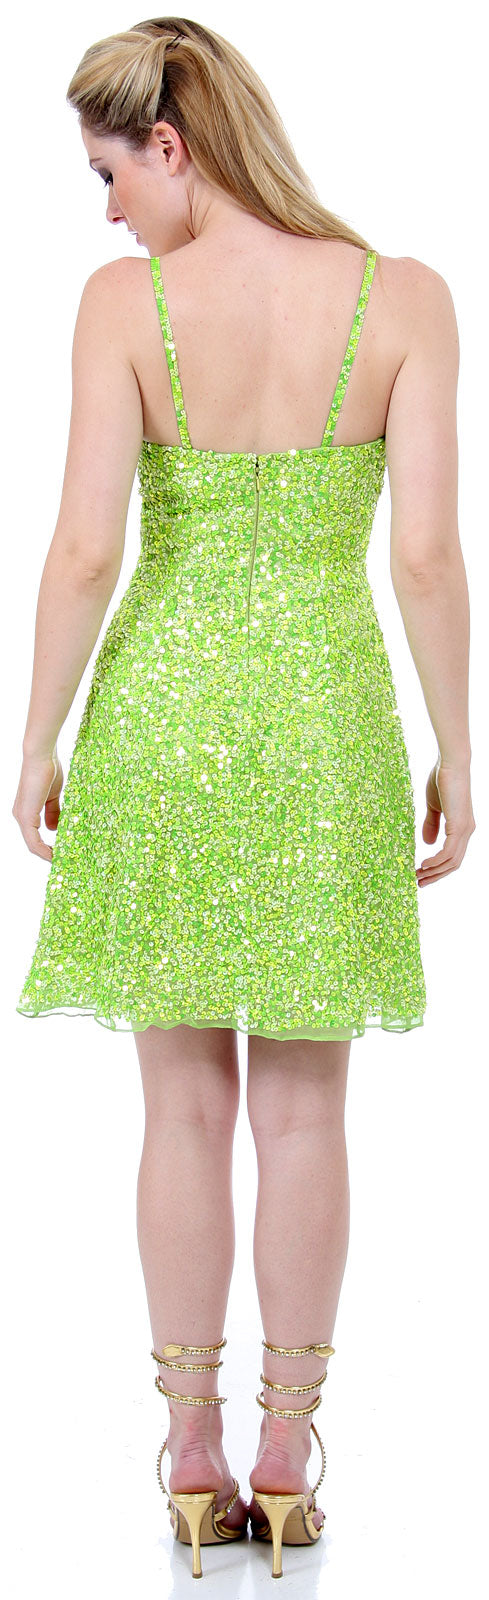 Back image of Short Sequin Spaghetti Strapped Party Dress